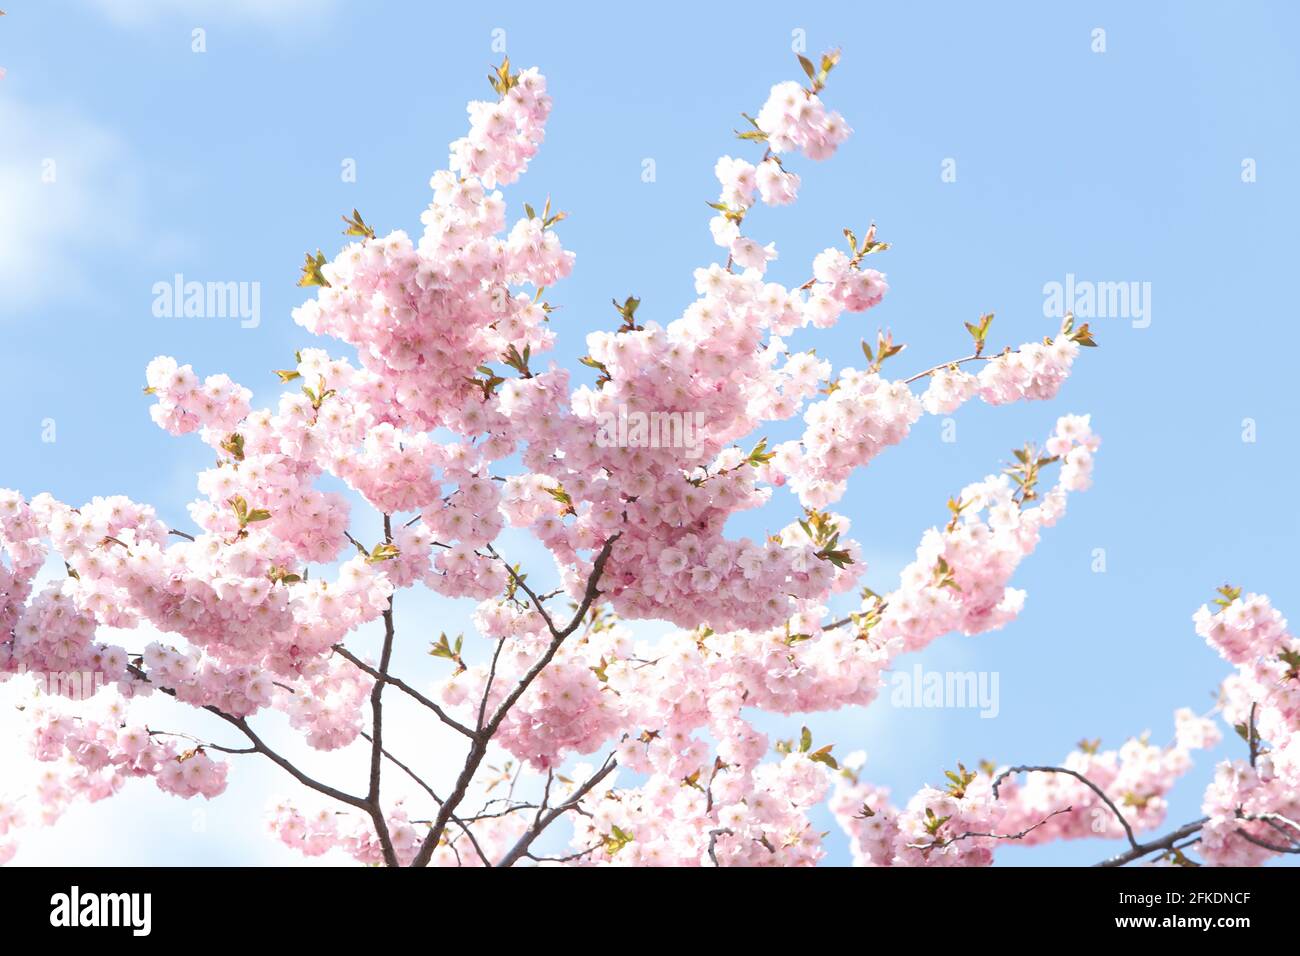 Bllooming Japanese cherry tree against a blue sky. Stock Photo